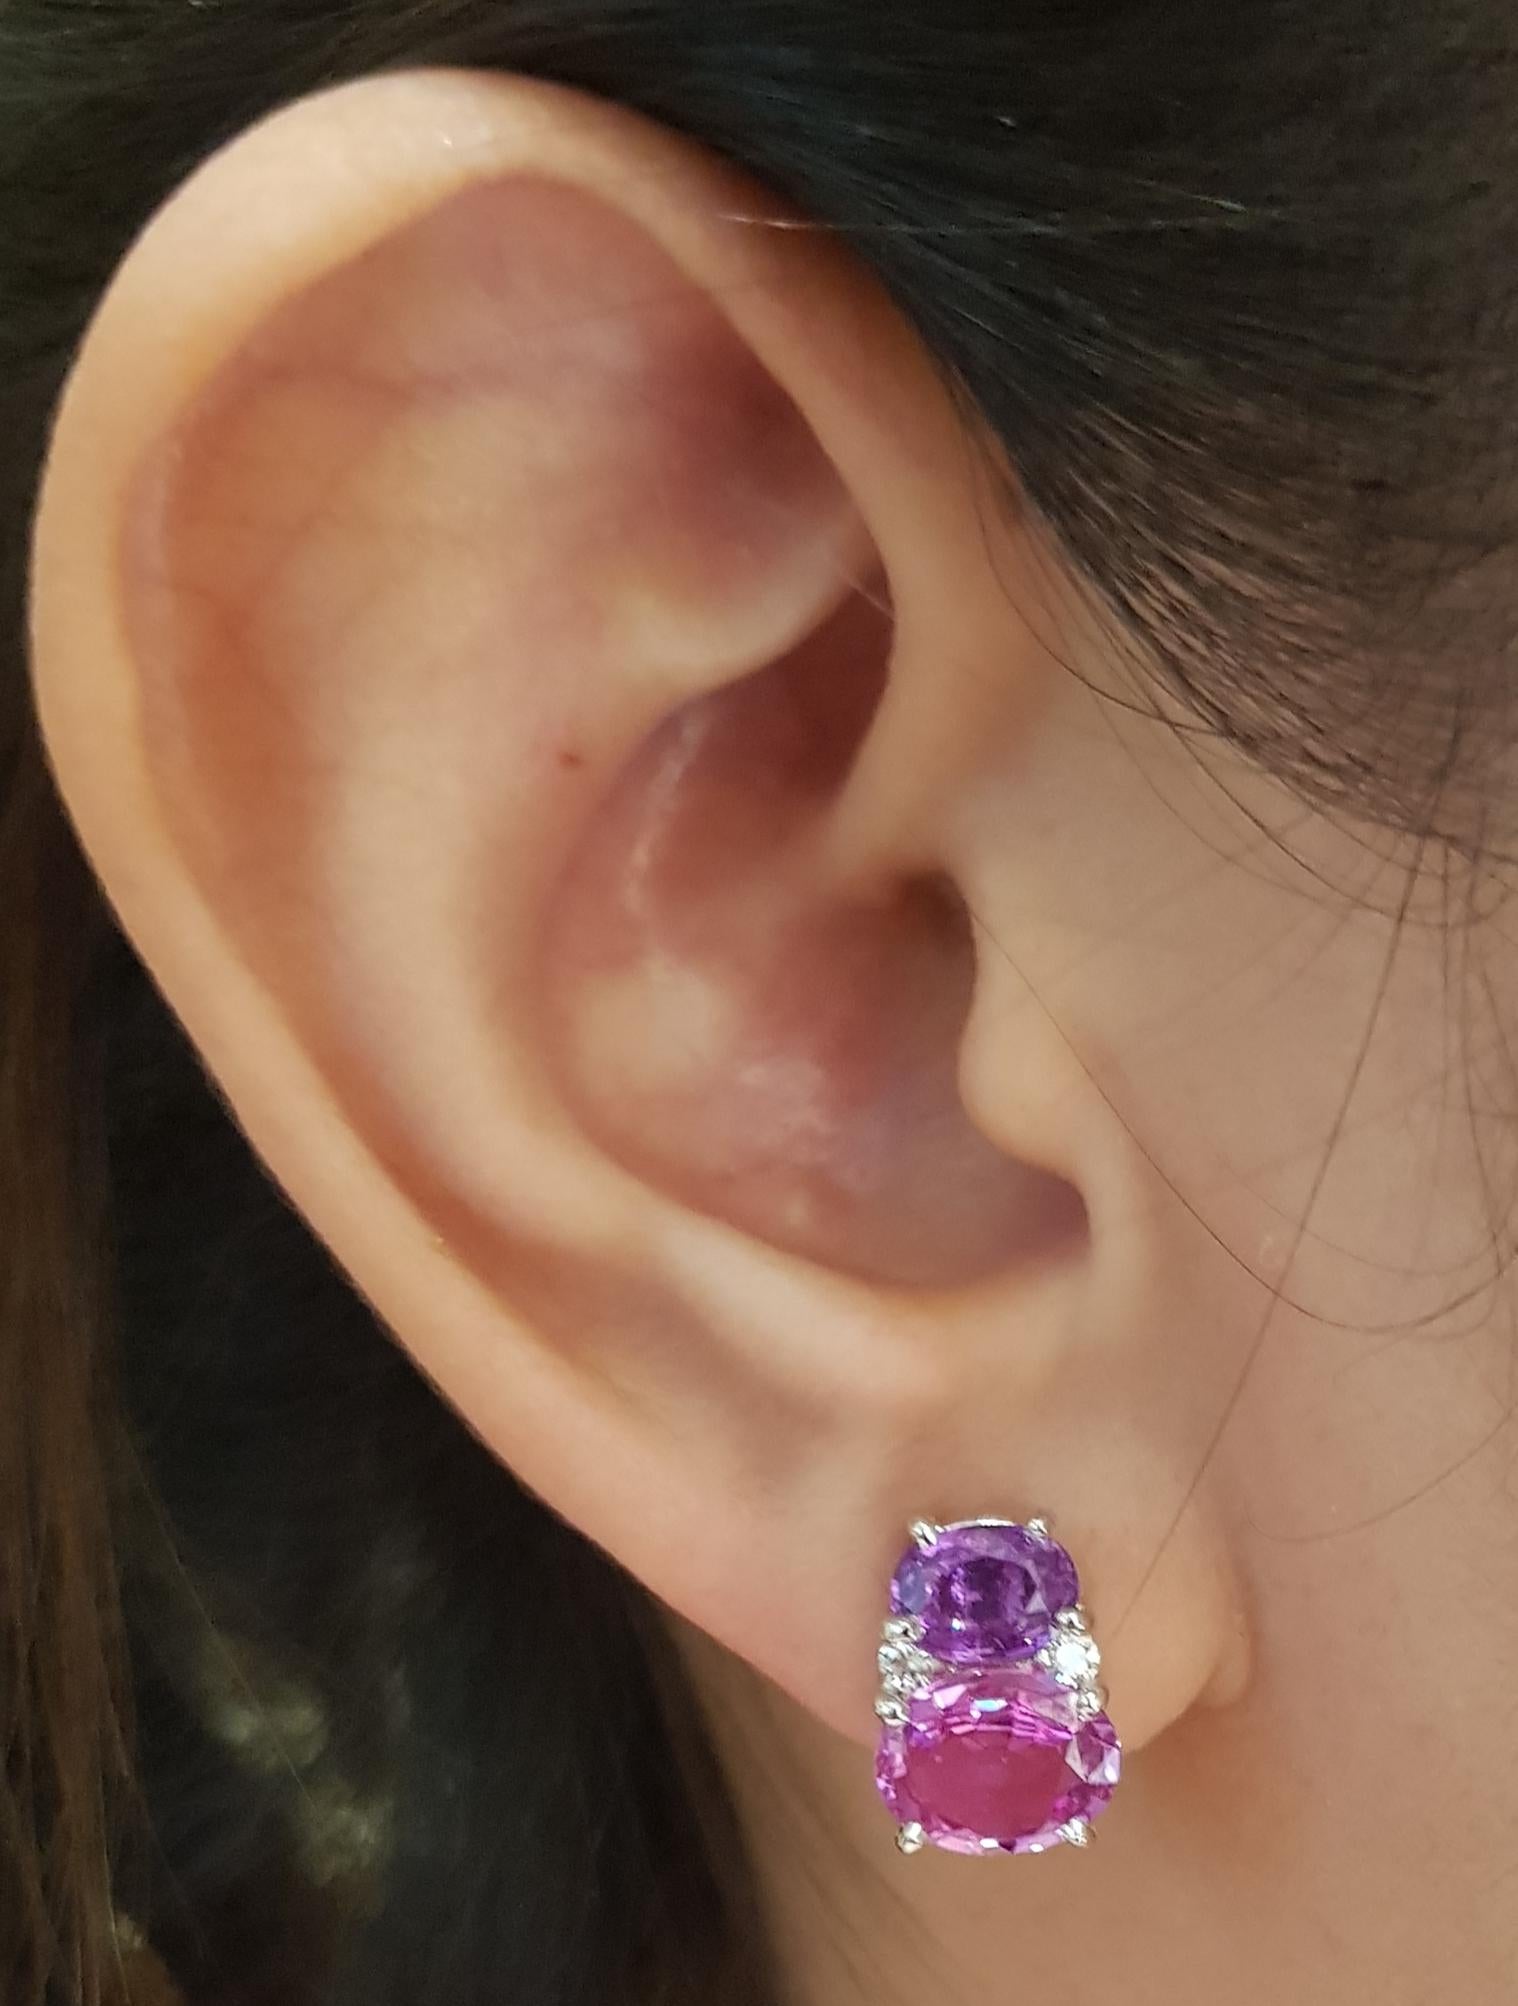 Pink Sapphire 4.09 carats, Purple Sapphire 1.76 carats and Diamond 0.13 carat Earrings set in 18 Karat White Gold Settings

Width:  0.9 cm 
Length:  1.2 cm
Total Weight: 6.28 grams

